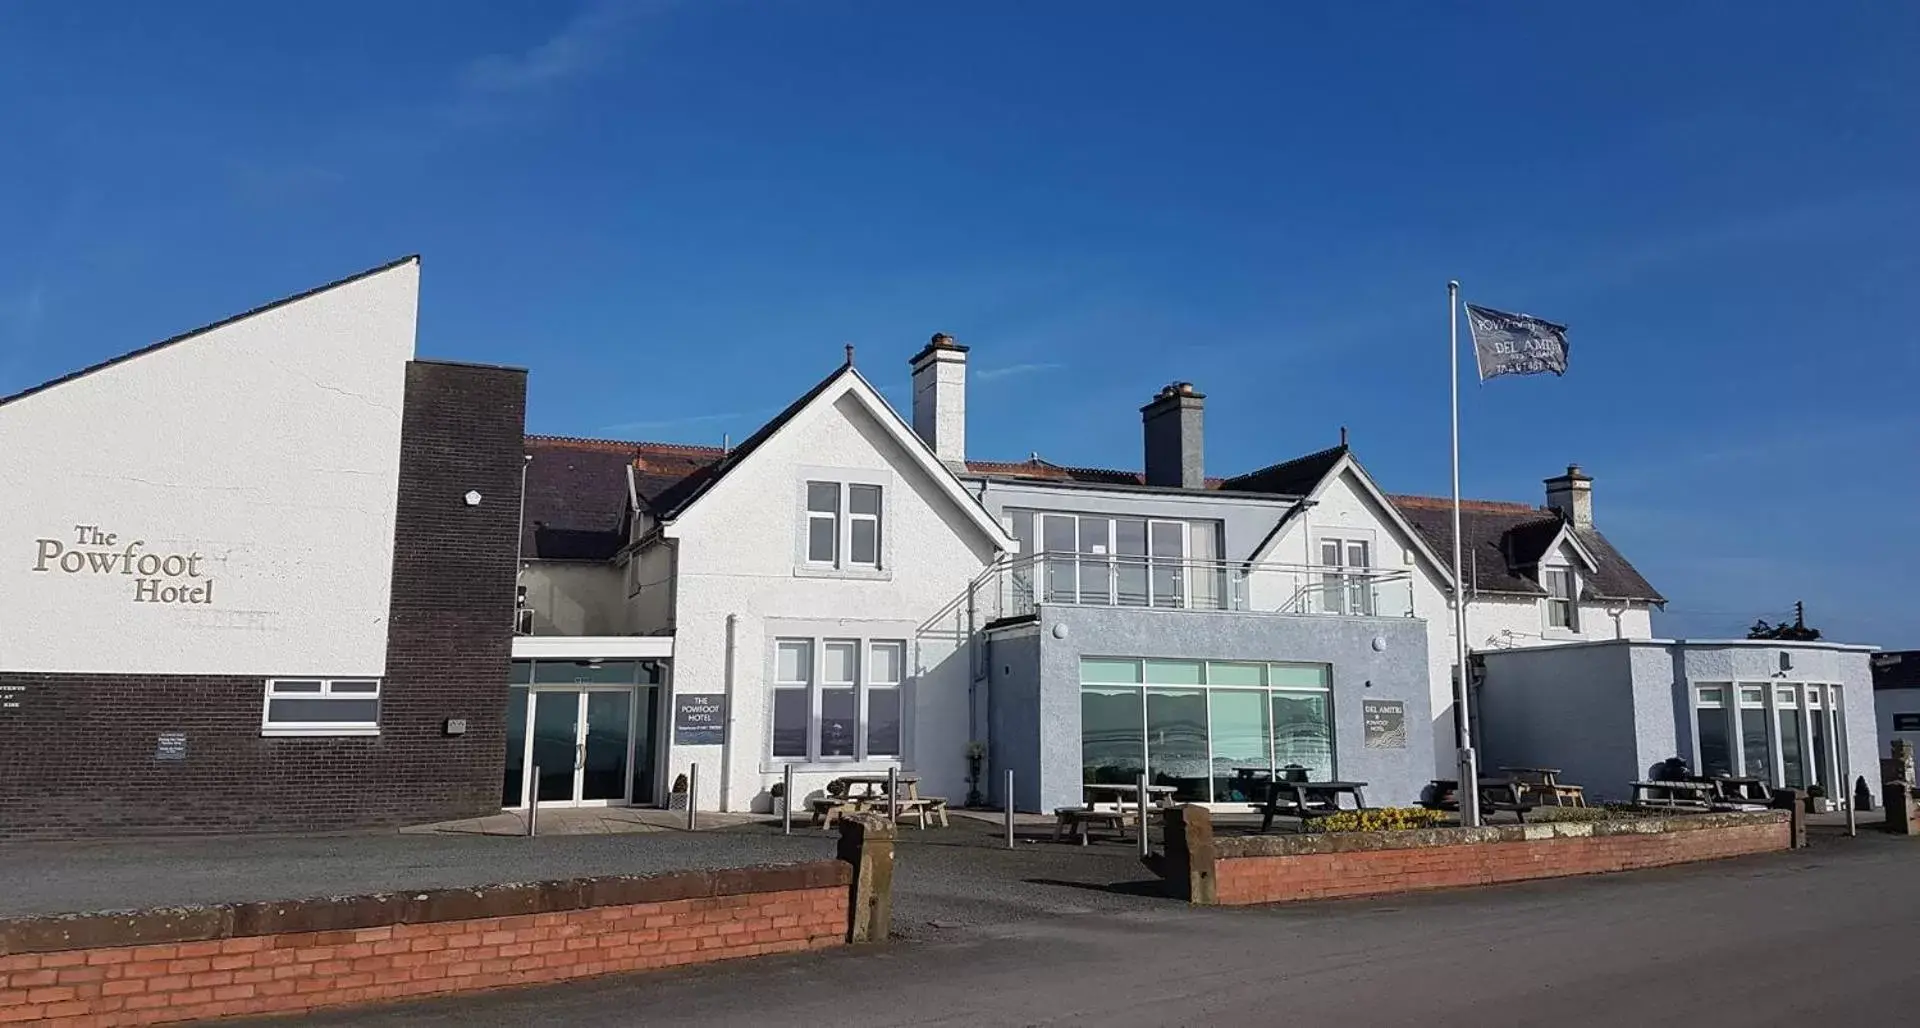 Property building in The Powfoot Hotel, Annan